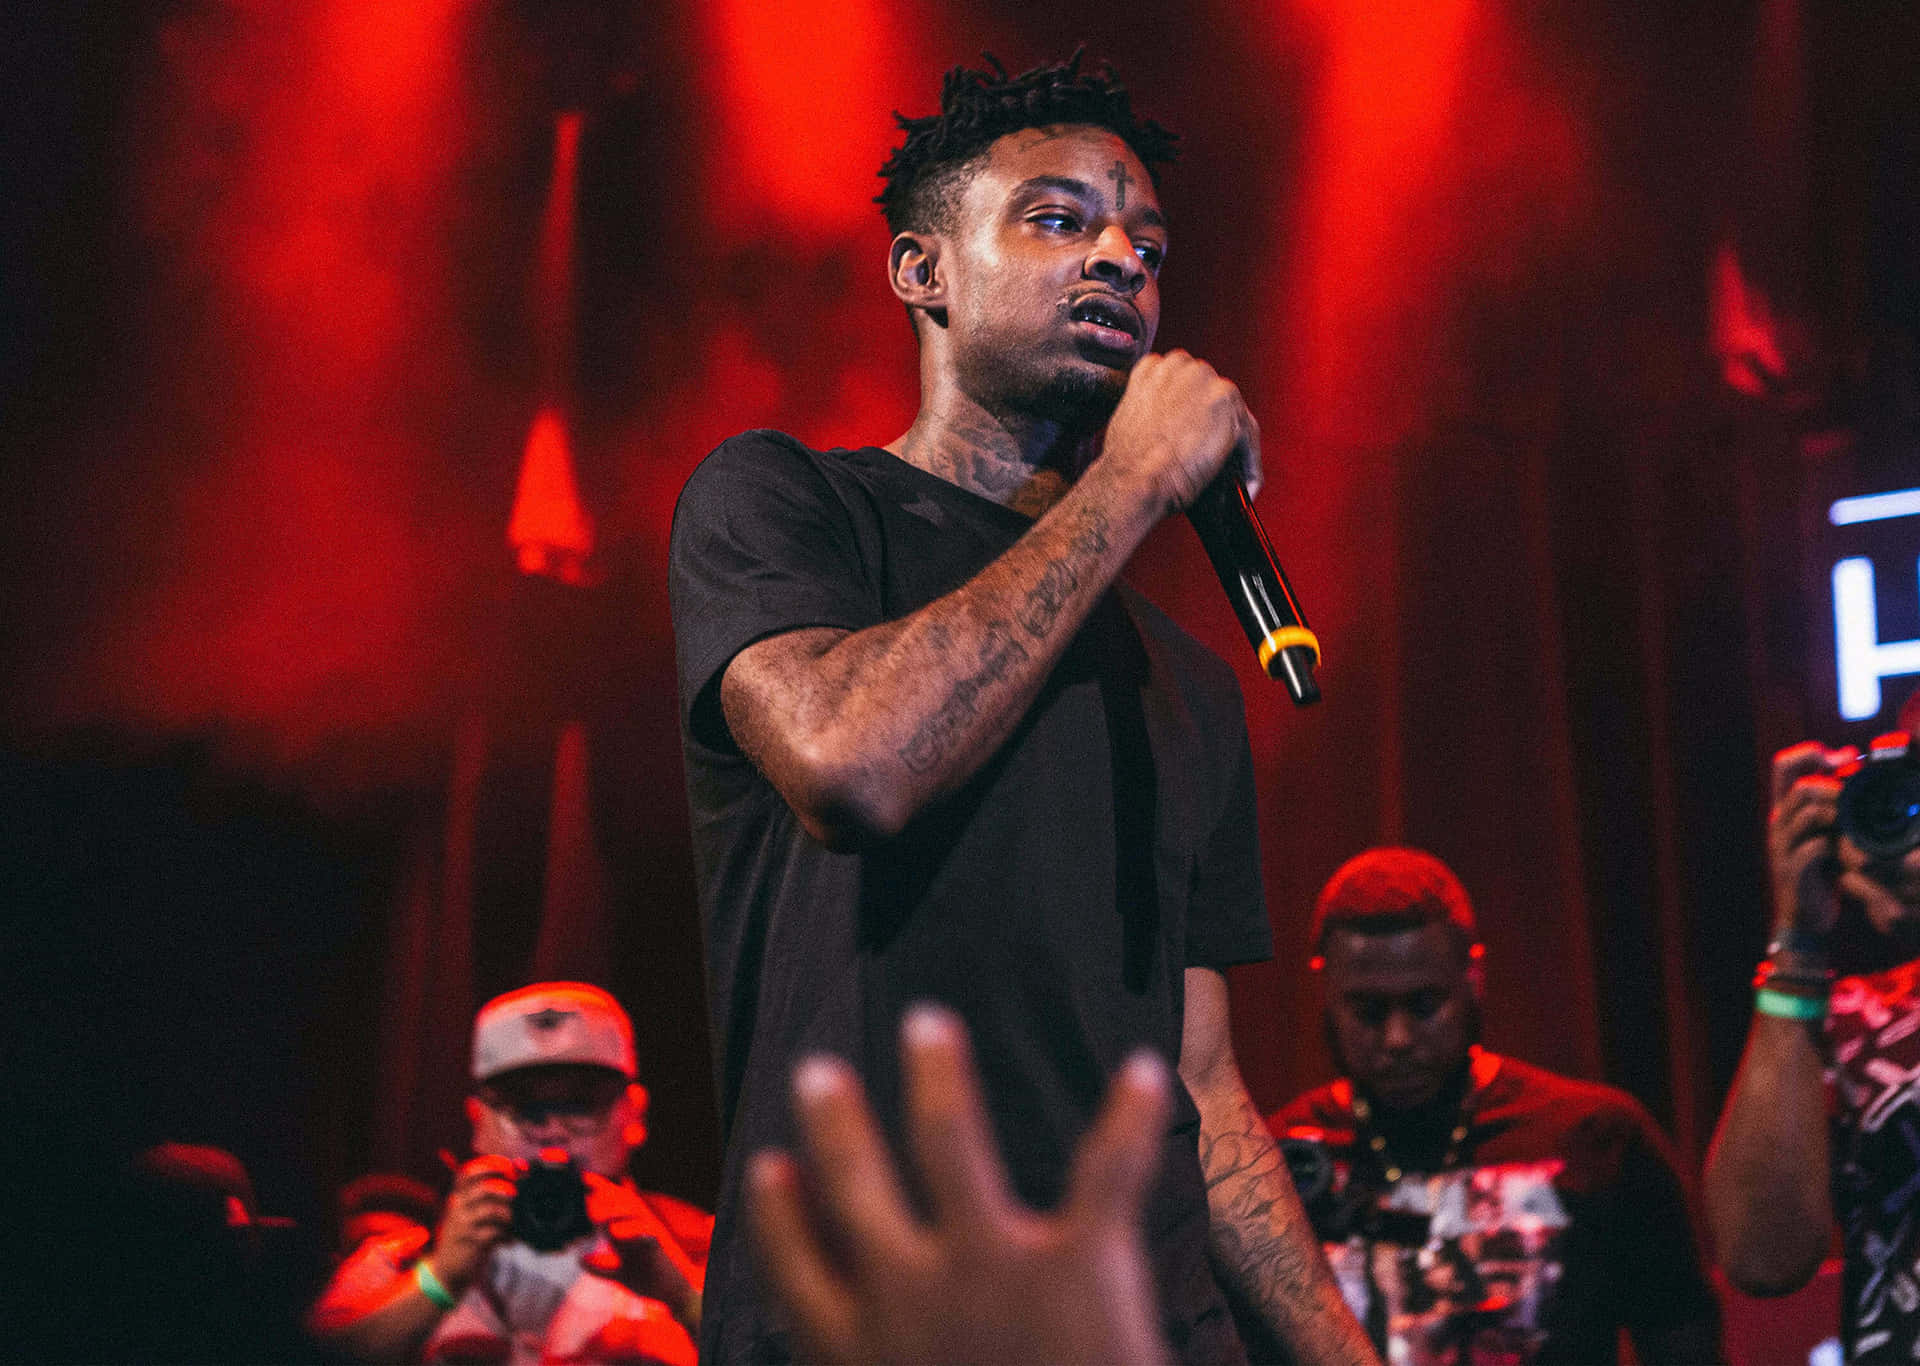 21 Savage wearing his signature chain during a live performance